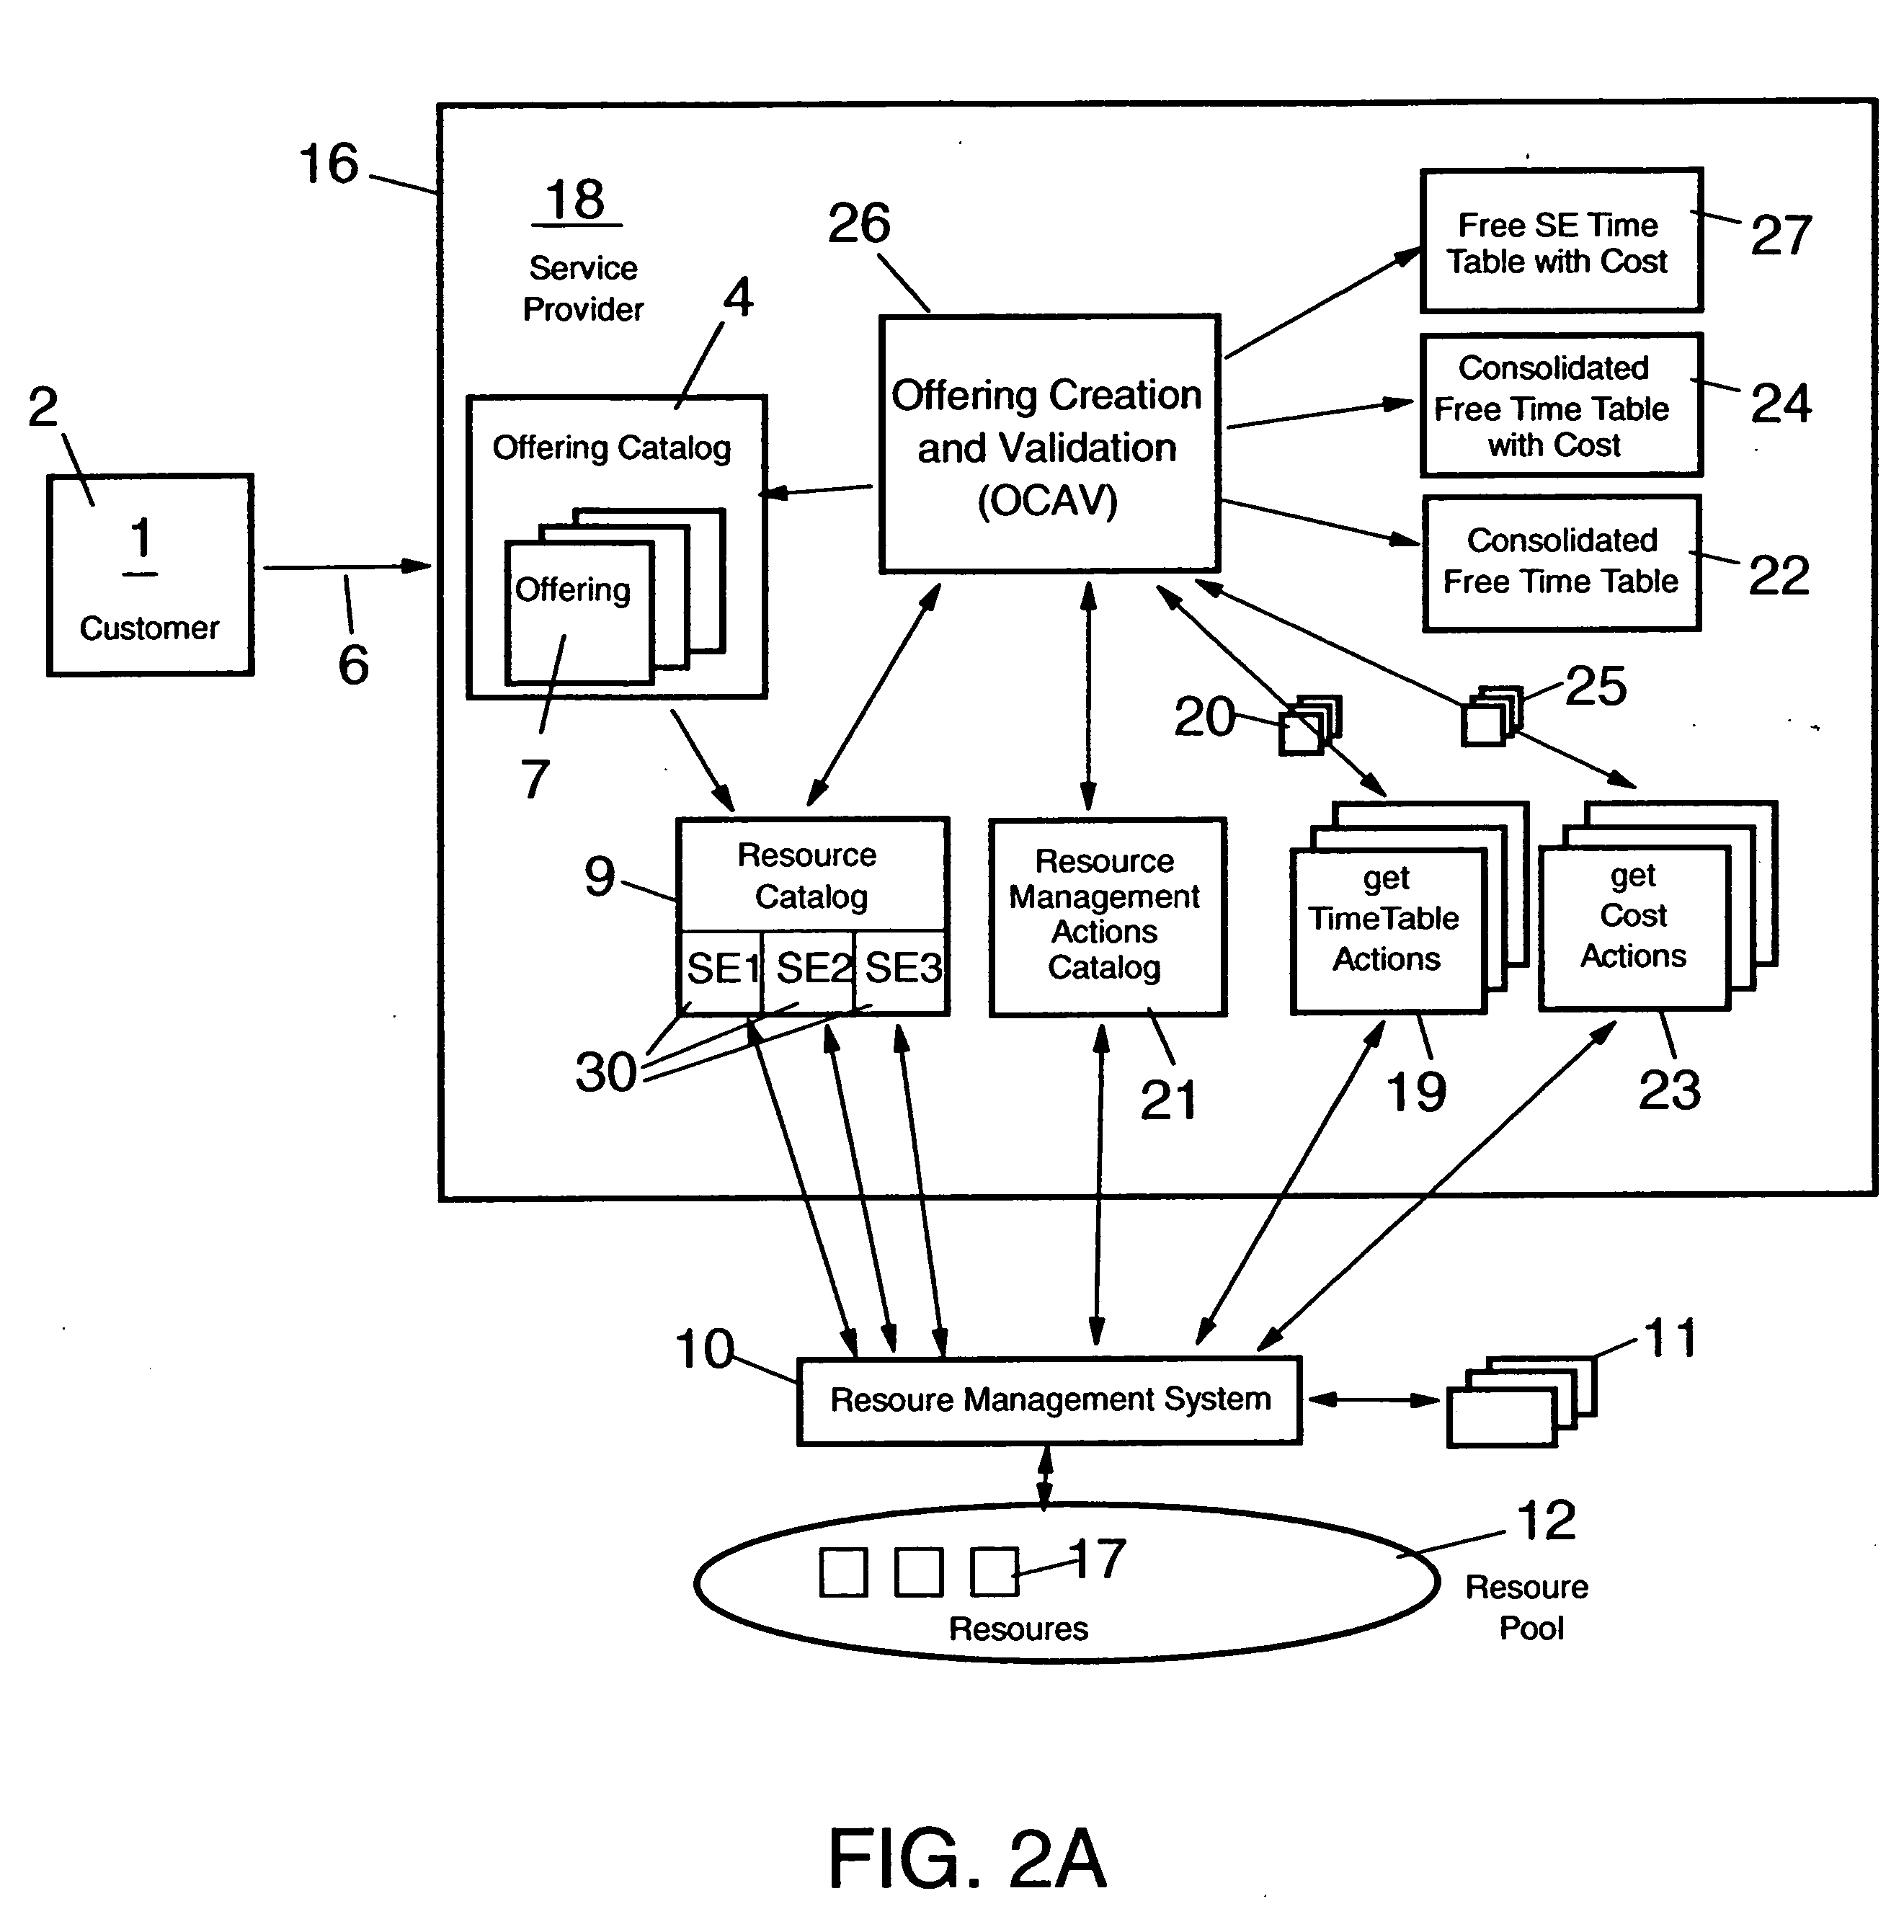 Method and system for dynamically and automatically setting up offerings for it services